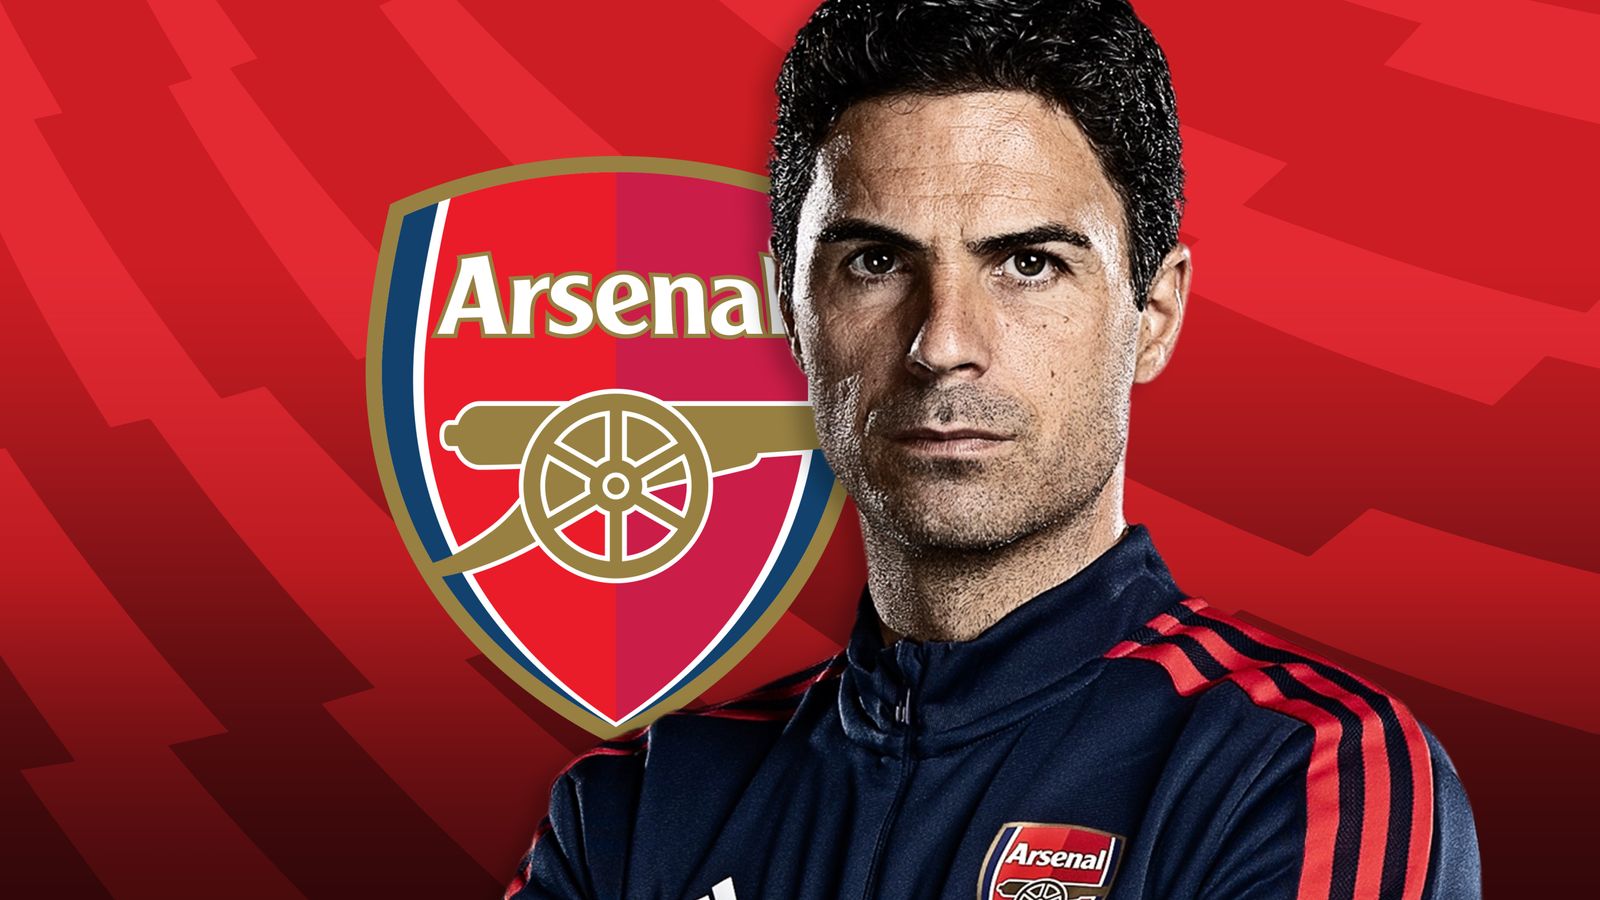 Mikel Arteta exclusive: Arsenal boss opens up on stresses of management ahead of Liverpool clash | Football News